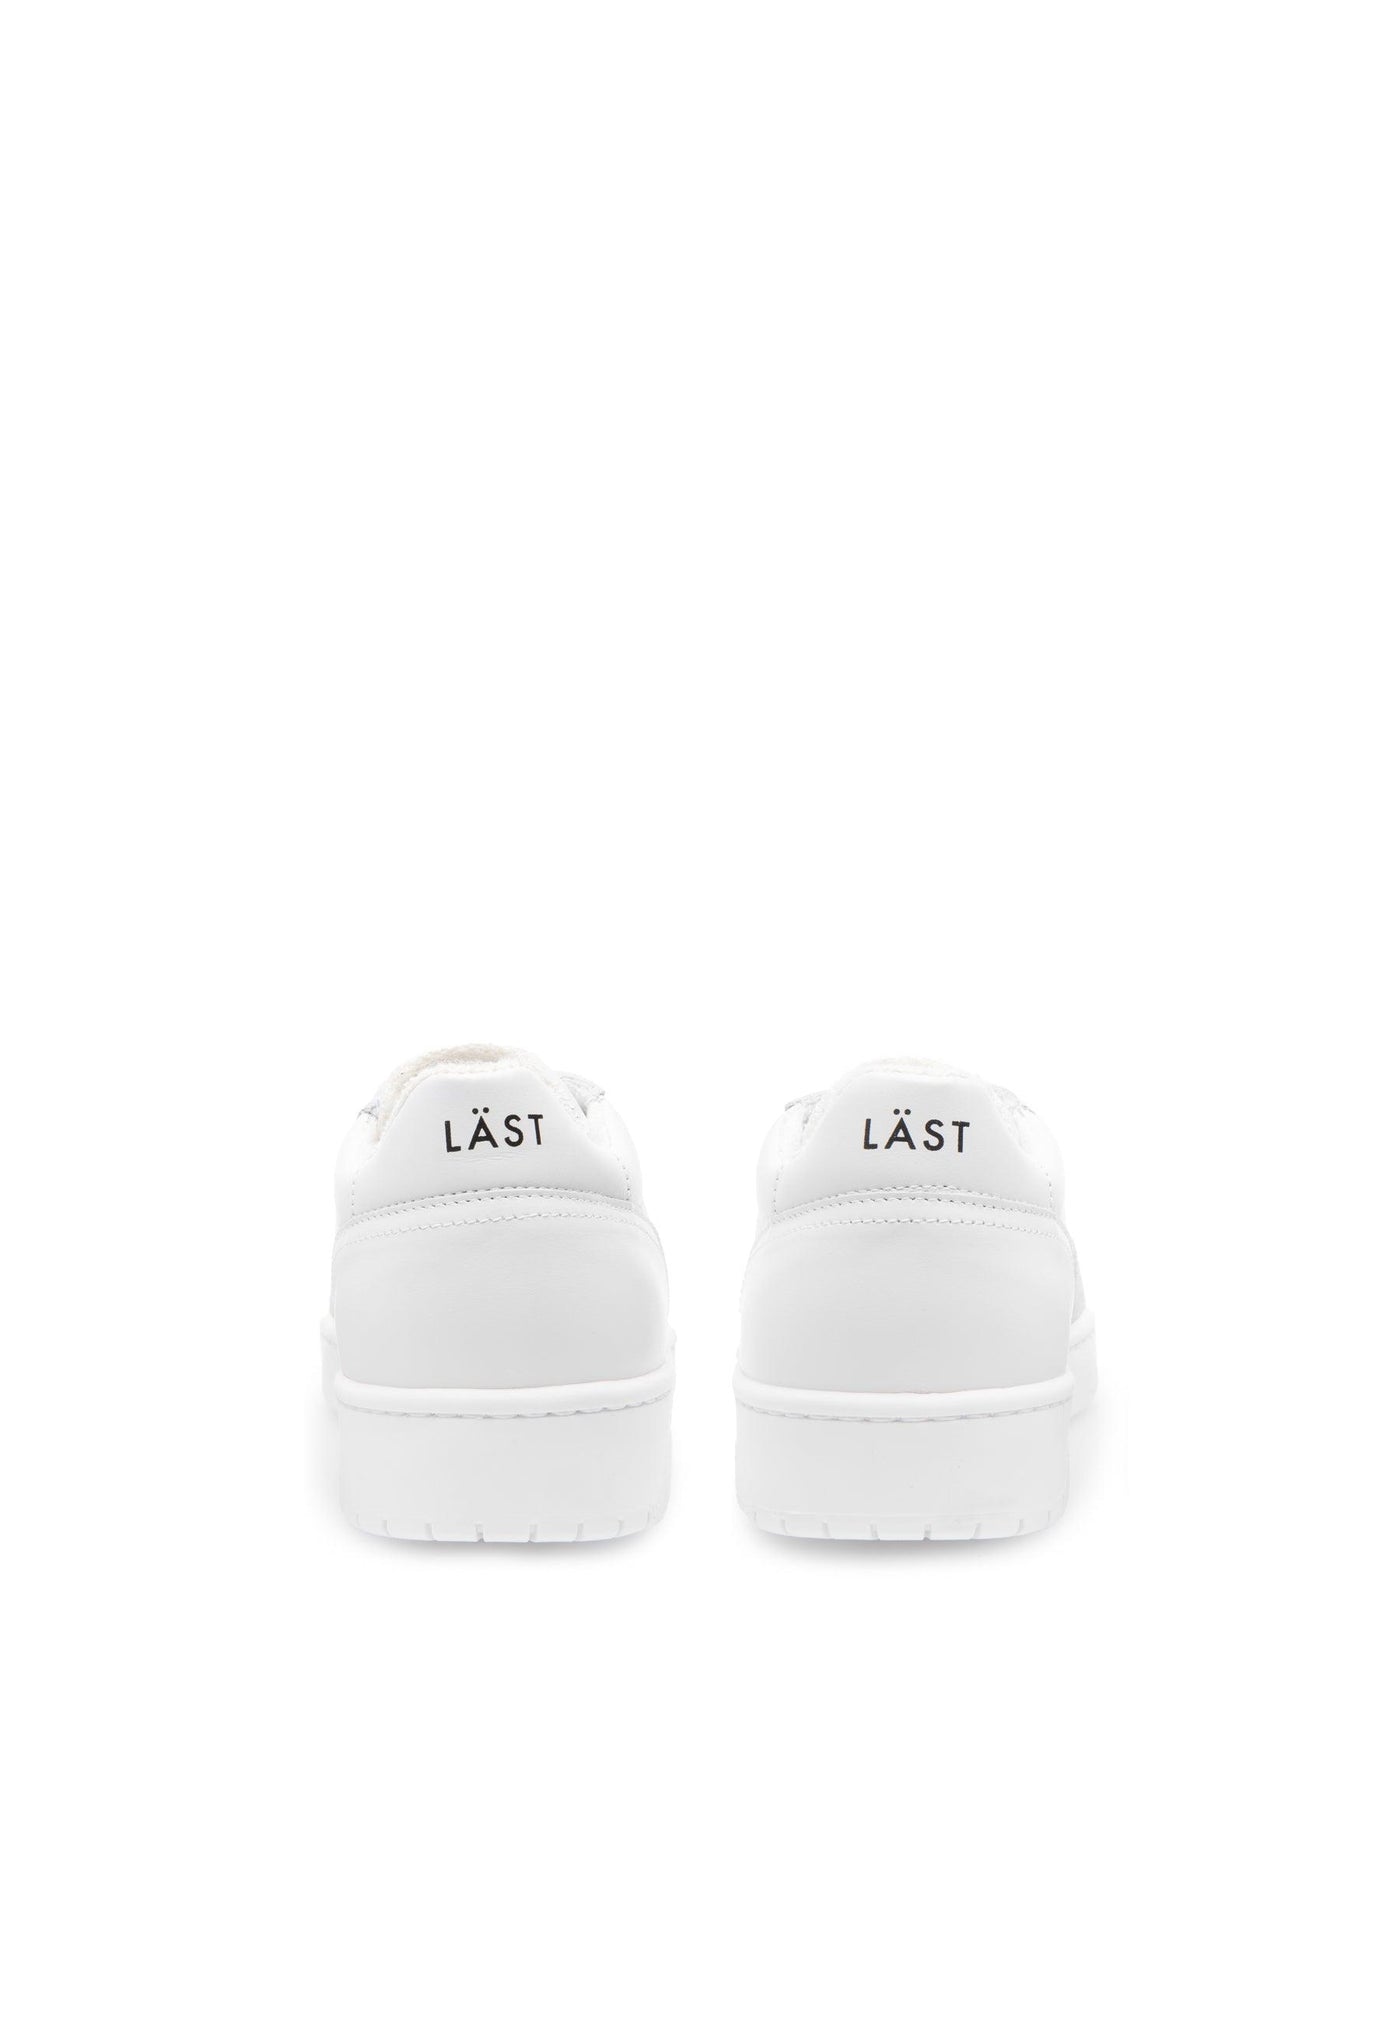 LÄST B-Ball - Leather/Suede - White Low Sneakers White